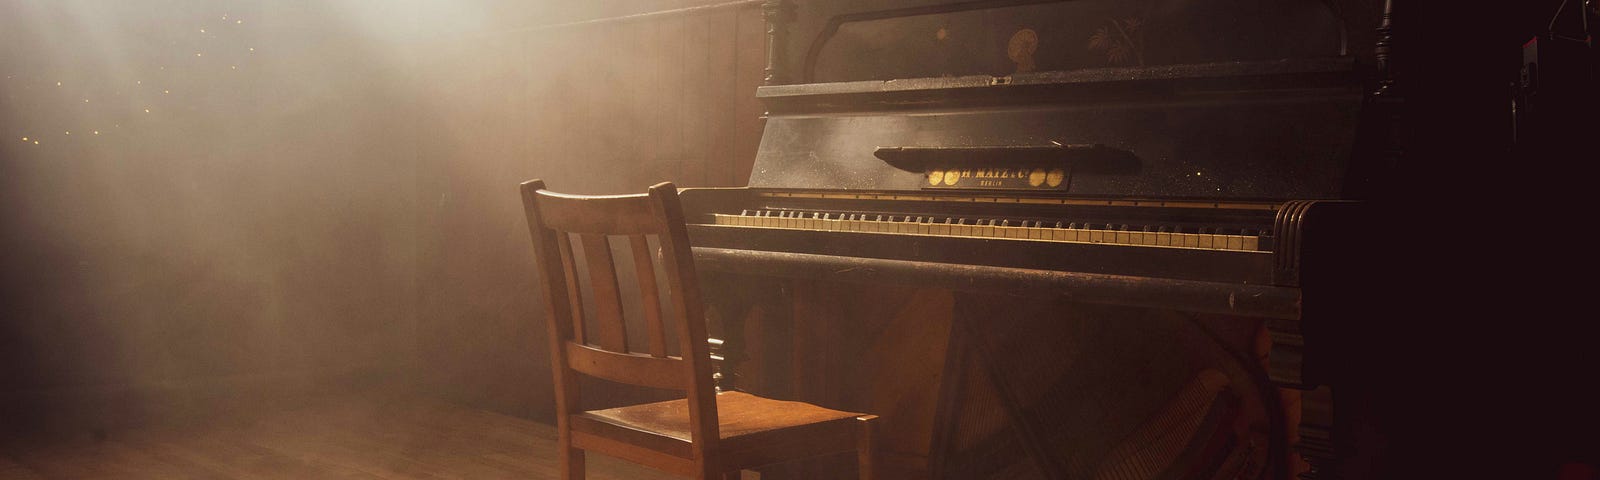 Sitting chair in a dusty room facing an old piano — Photo by Paul Arky on Unsplash